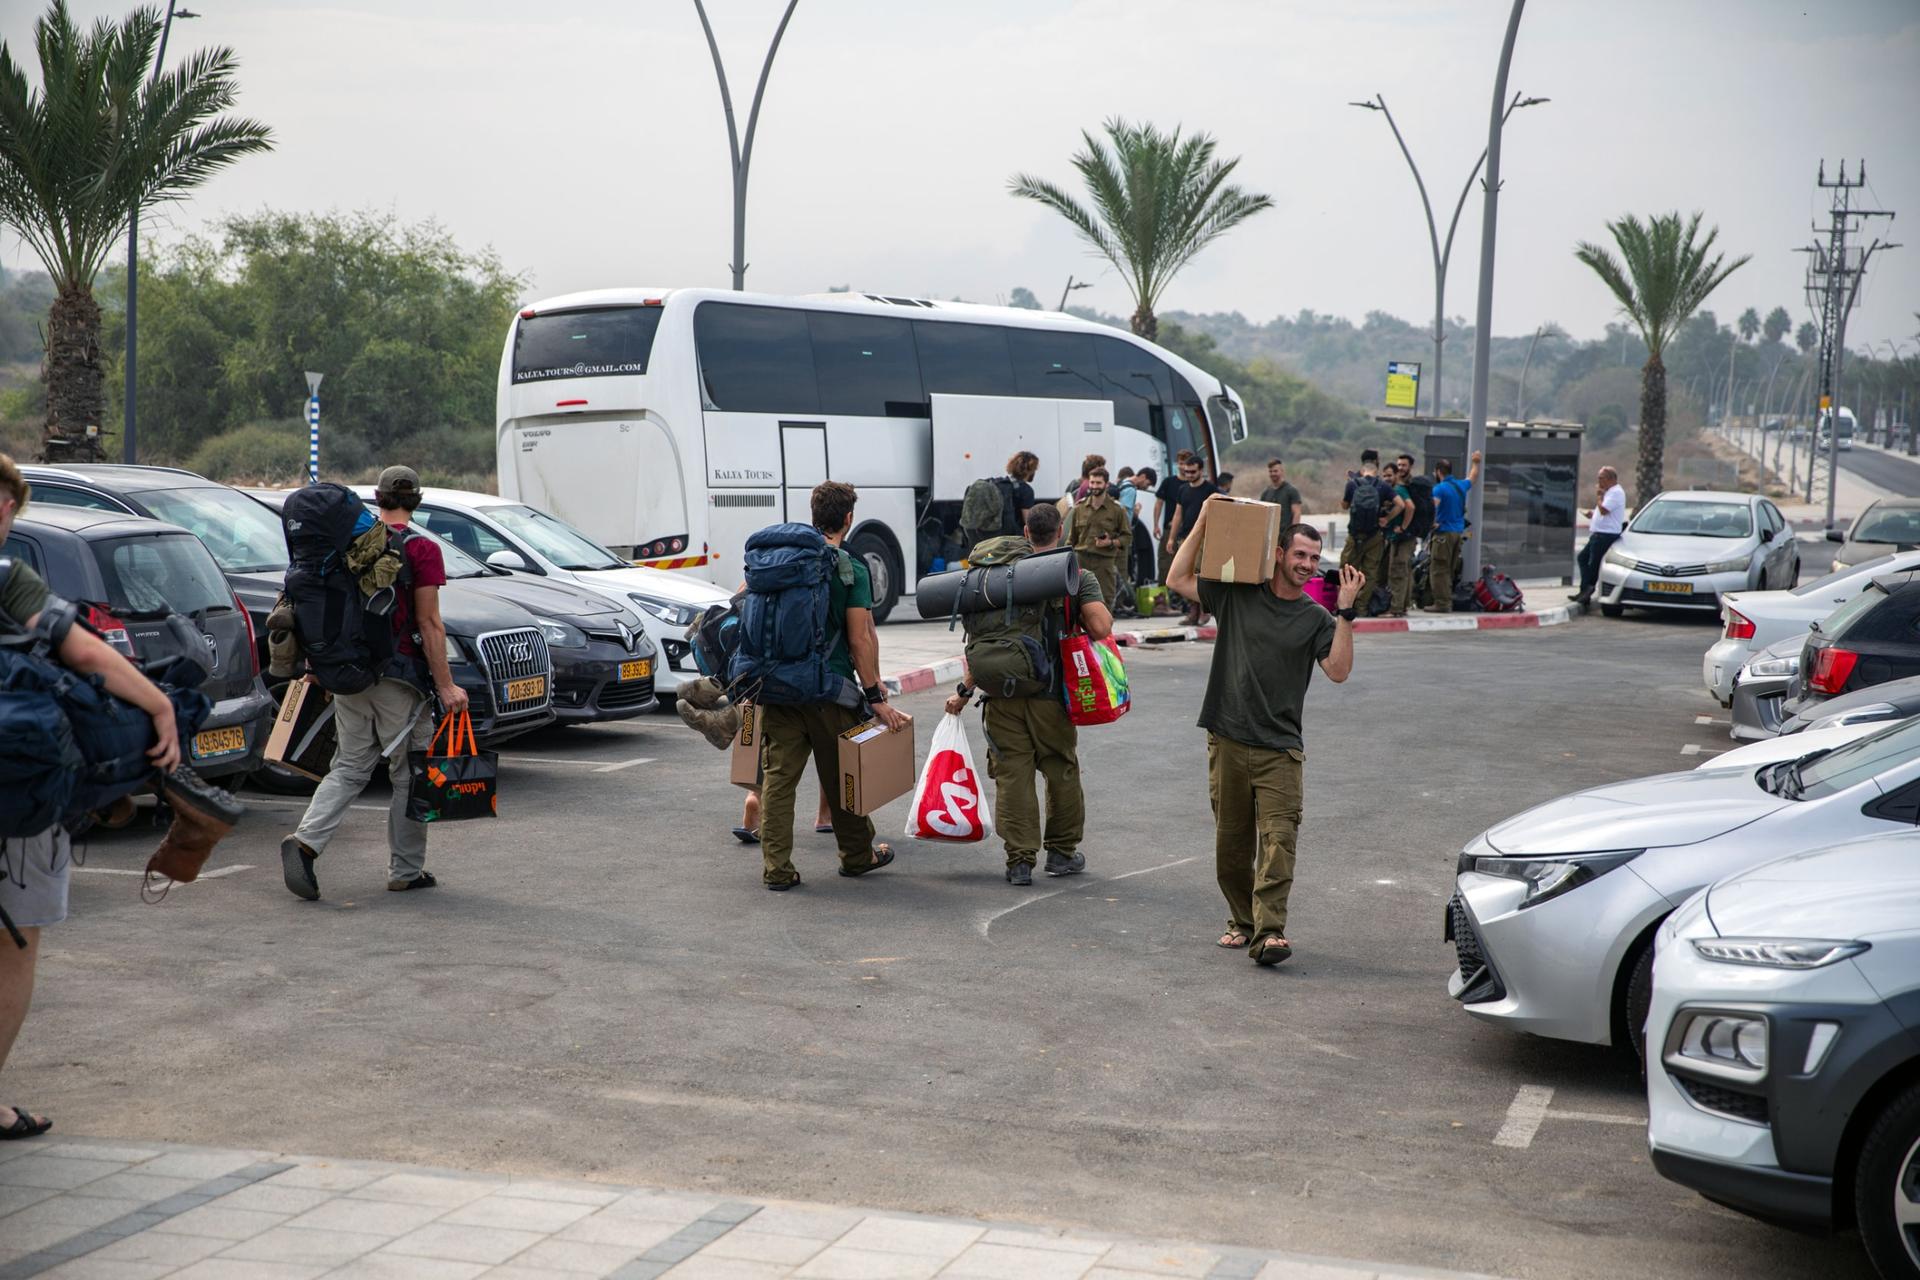 On the edge of Ashkelon, buses and green Israeli army vehicles were dropping off uniformed soldiers who’ve been fighting inside of the Gaza Strip.